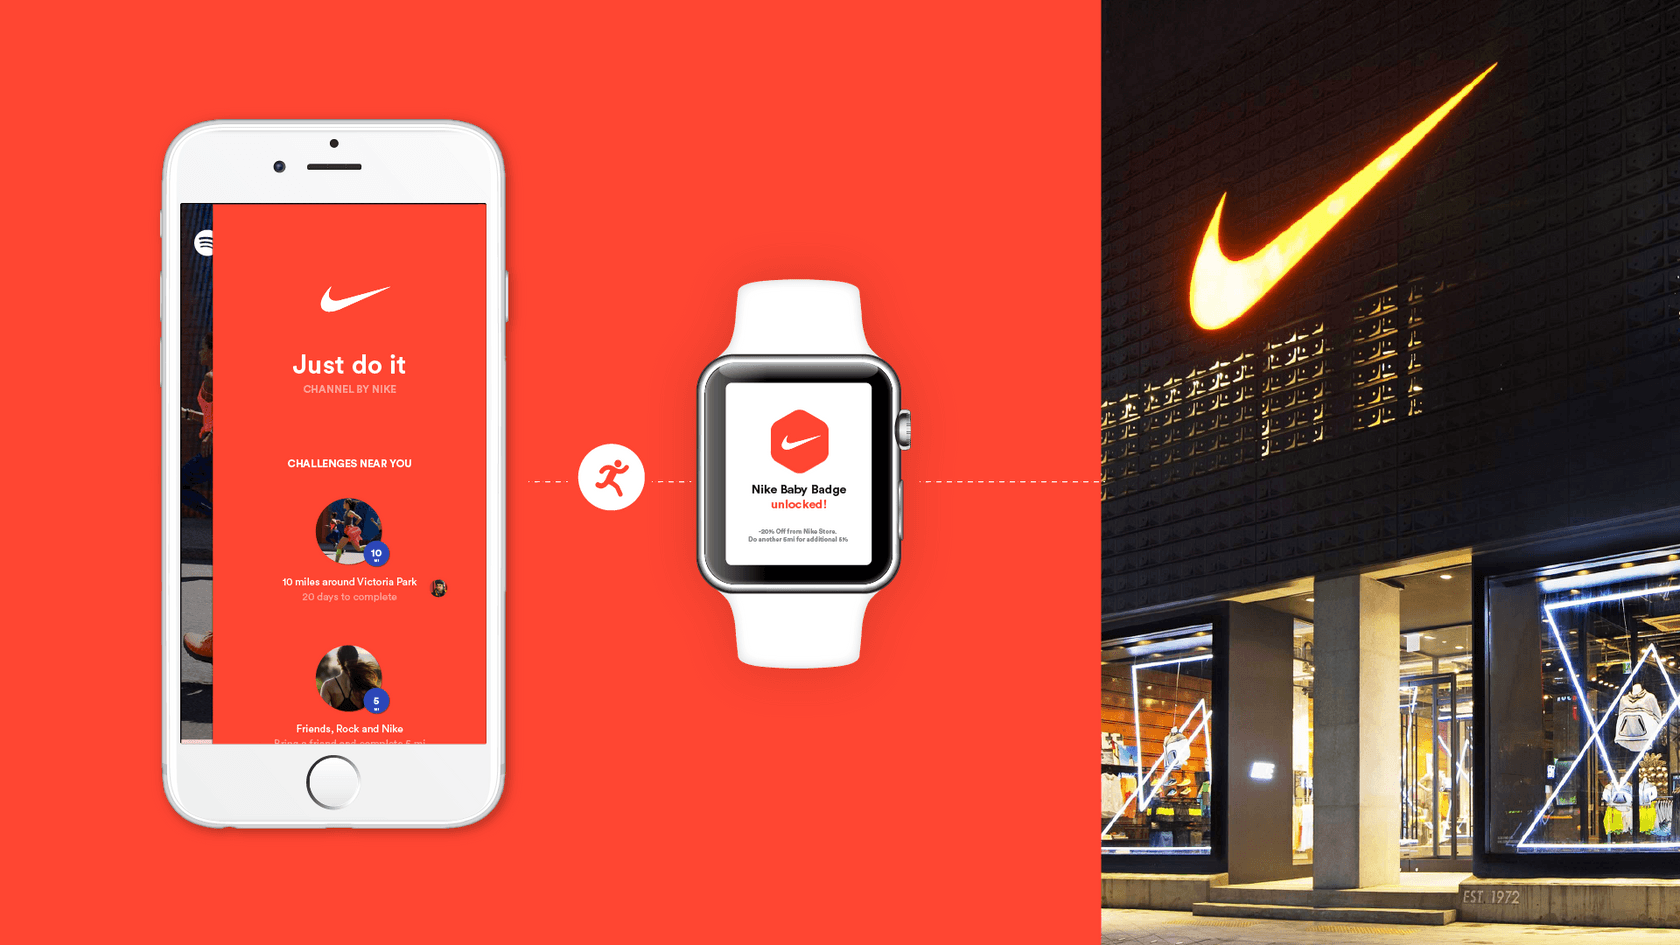 Mock-up of smartphone screen, smartwatch, and Nike store front.